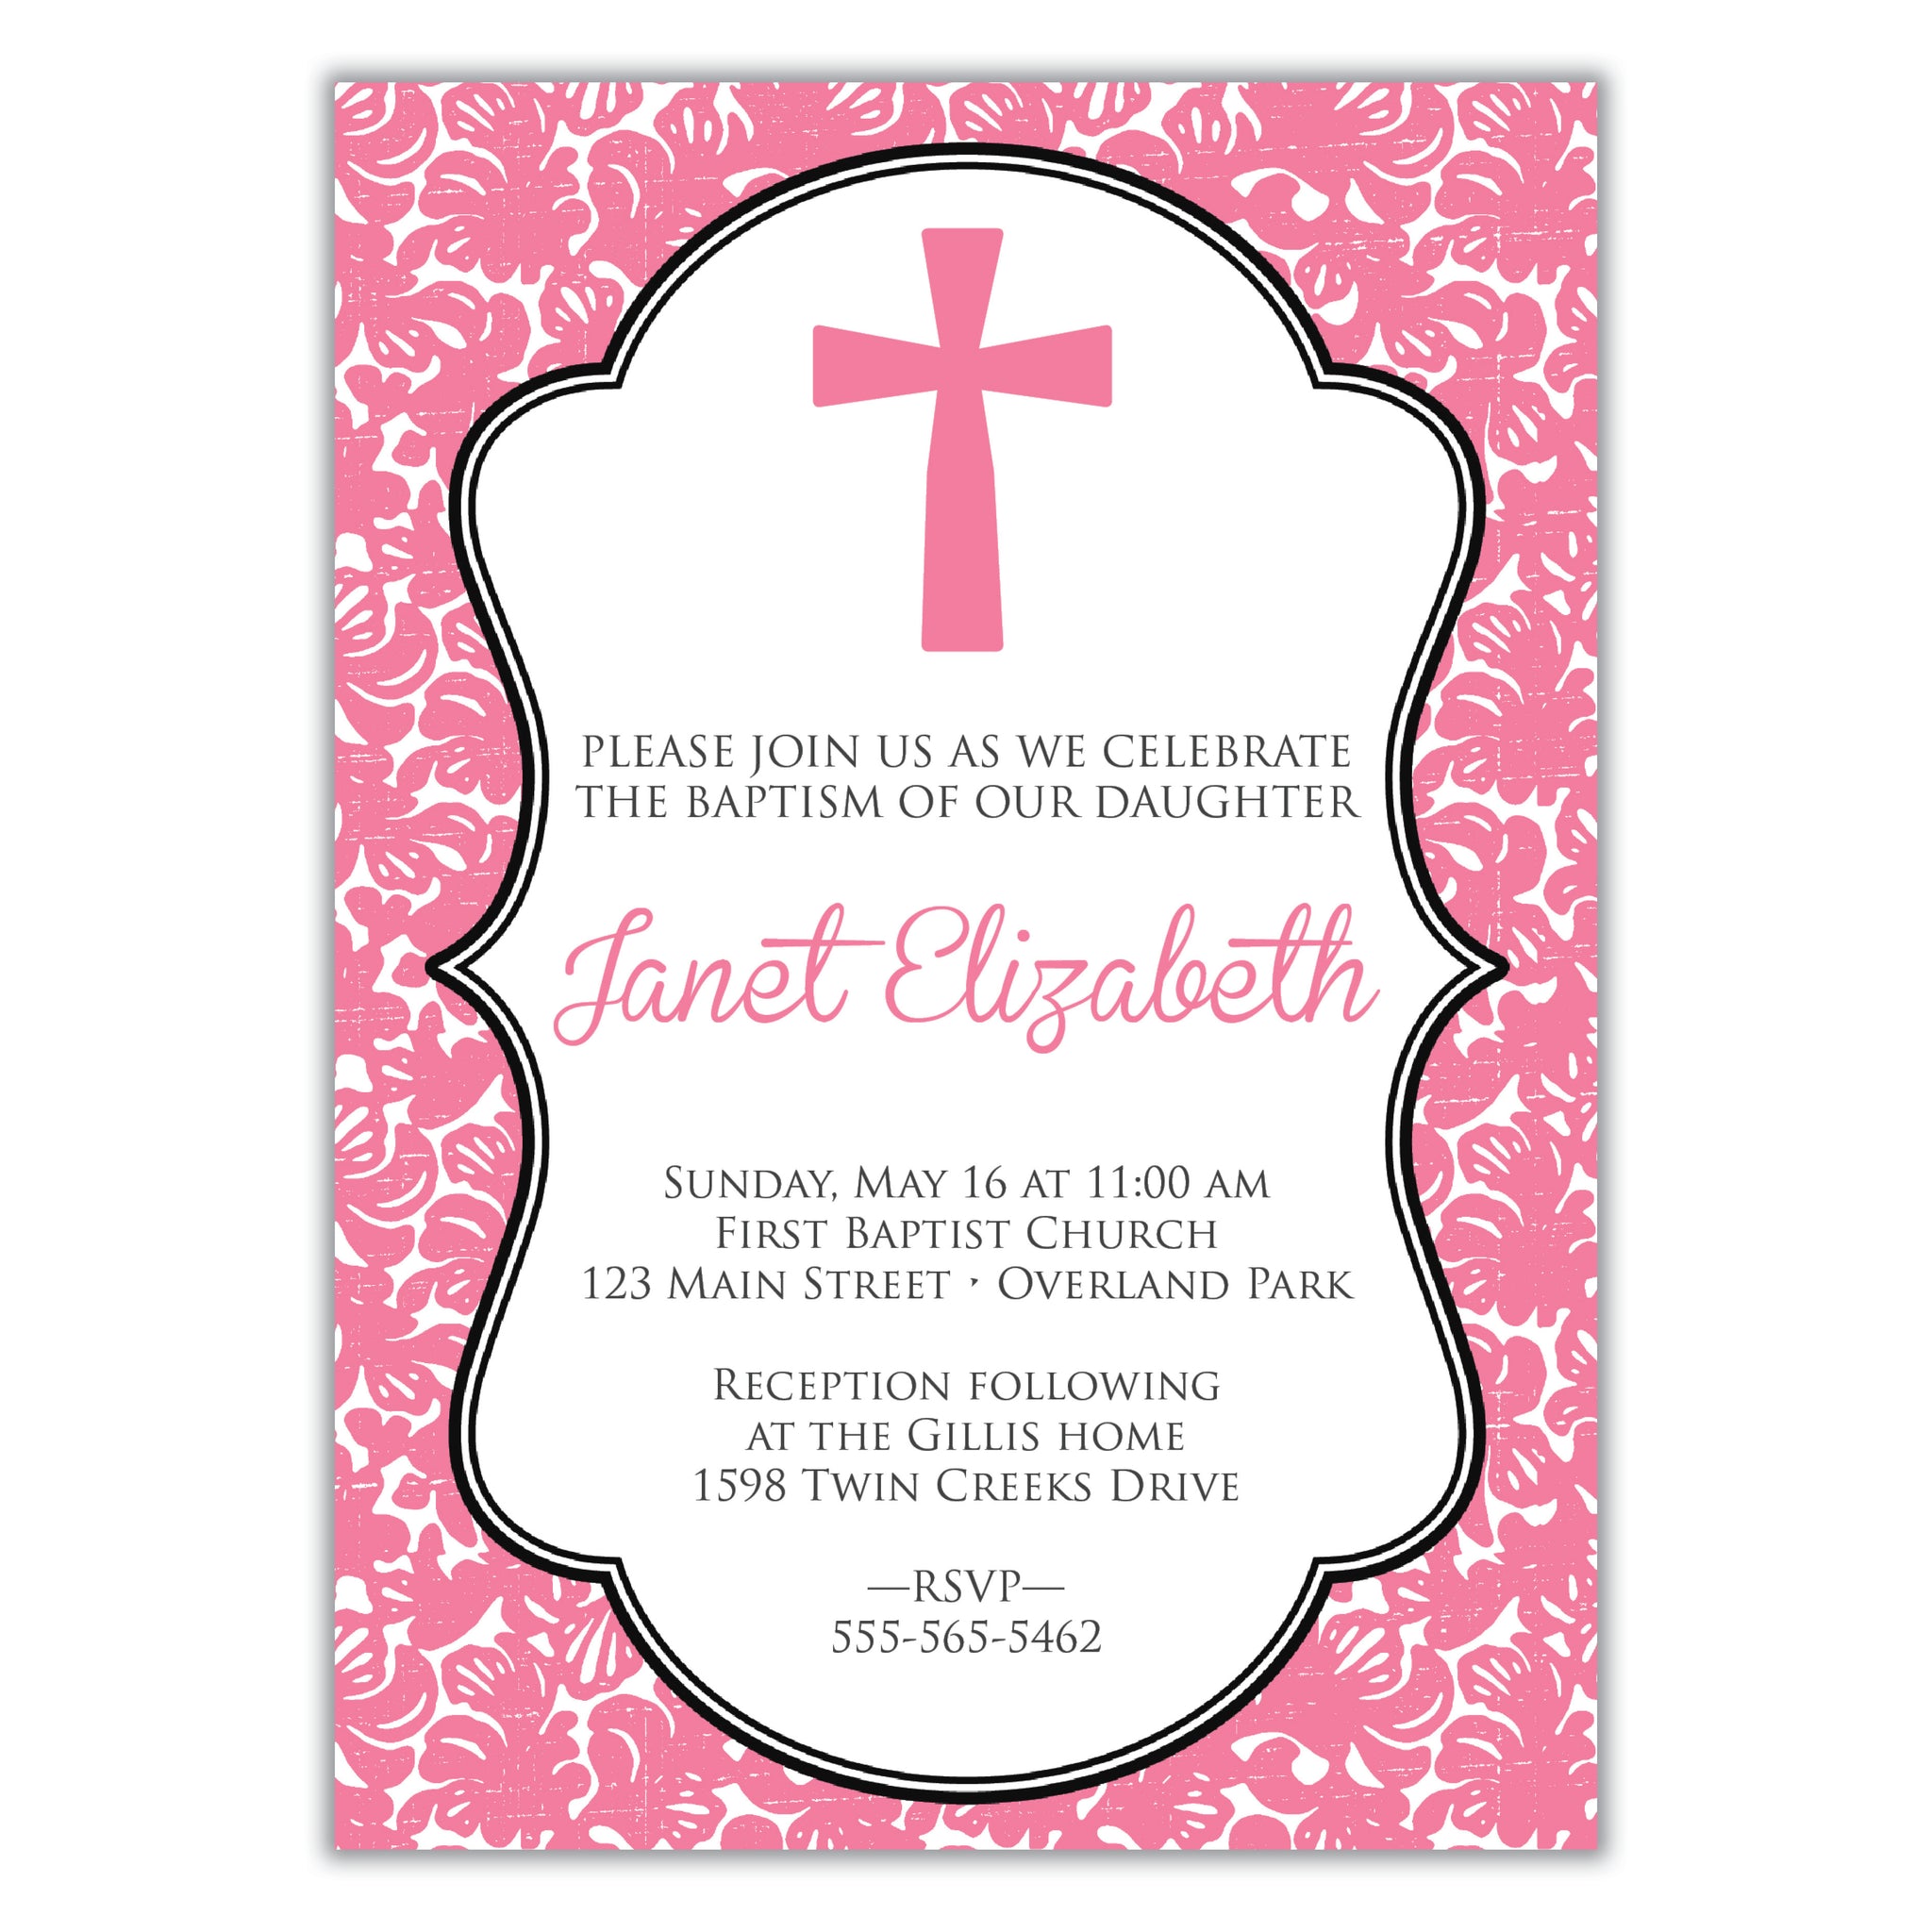 first communion invitations for twins